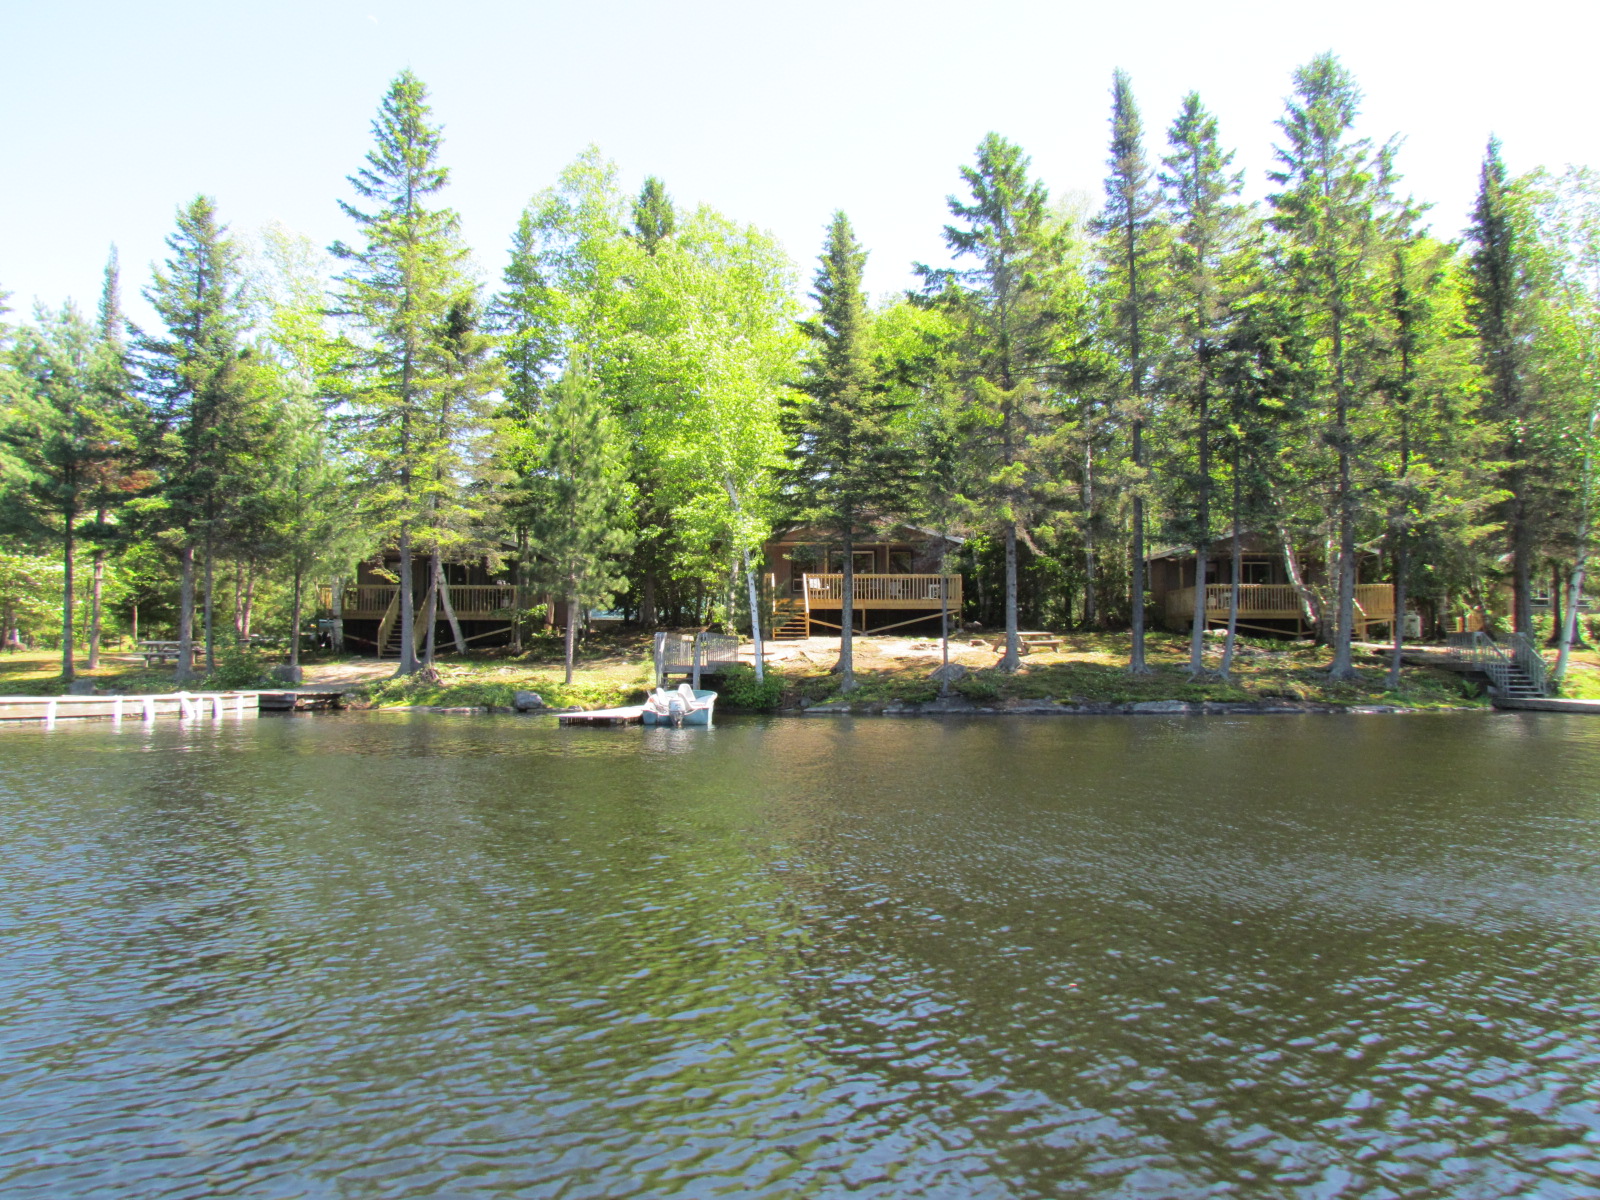 Taggart Bay Lodge viewed from the lake